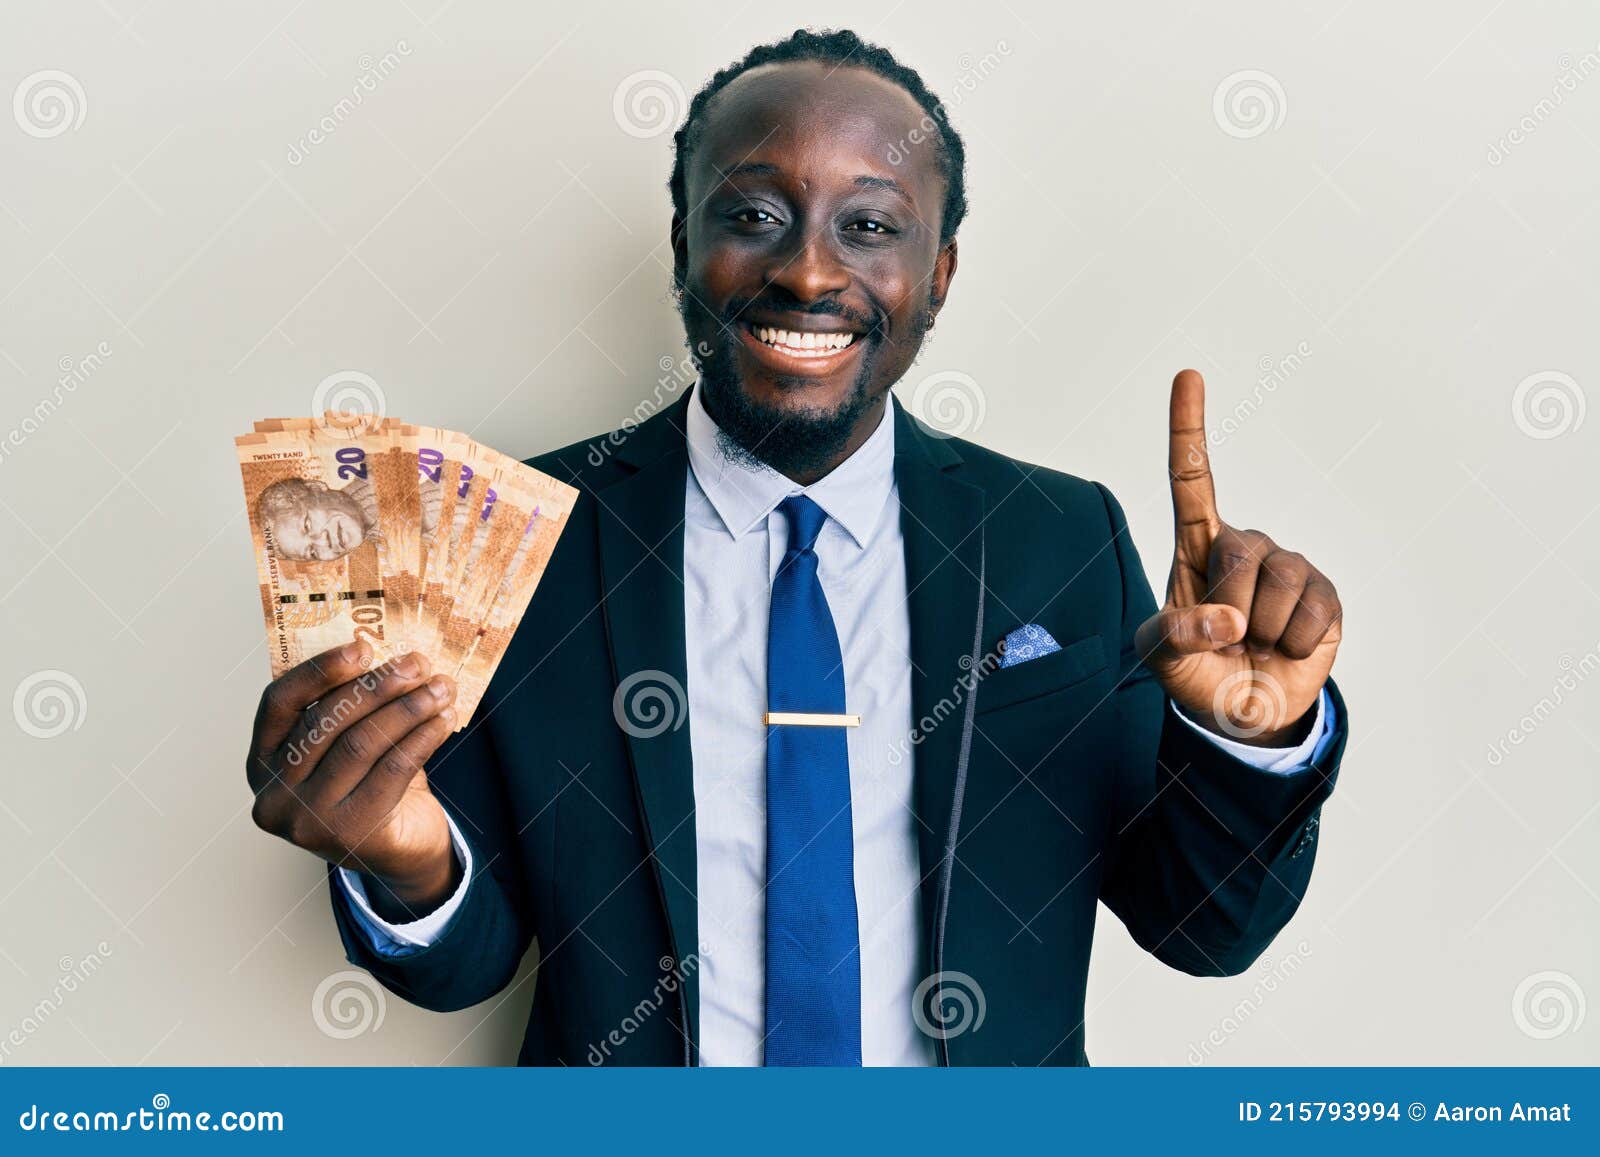 handsome young black man wearing business suit holding 20 rands banknotes smiling with an idea or question pointing finger with